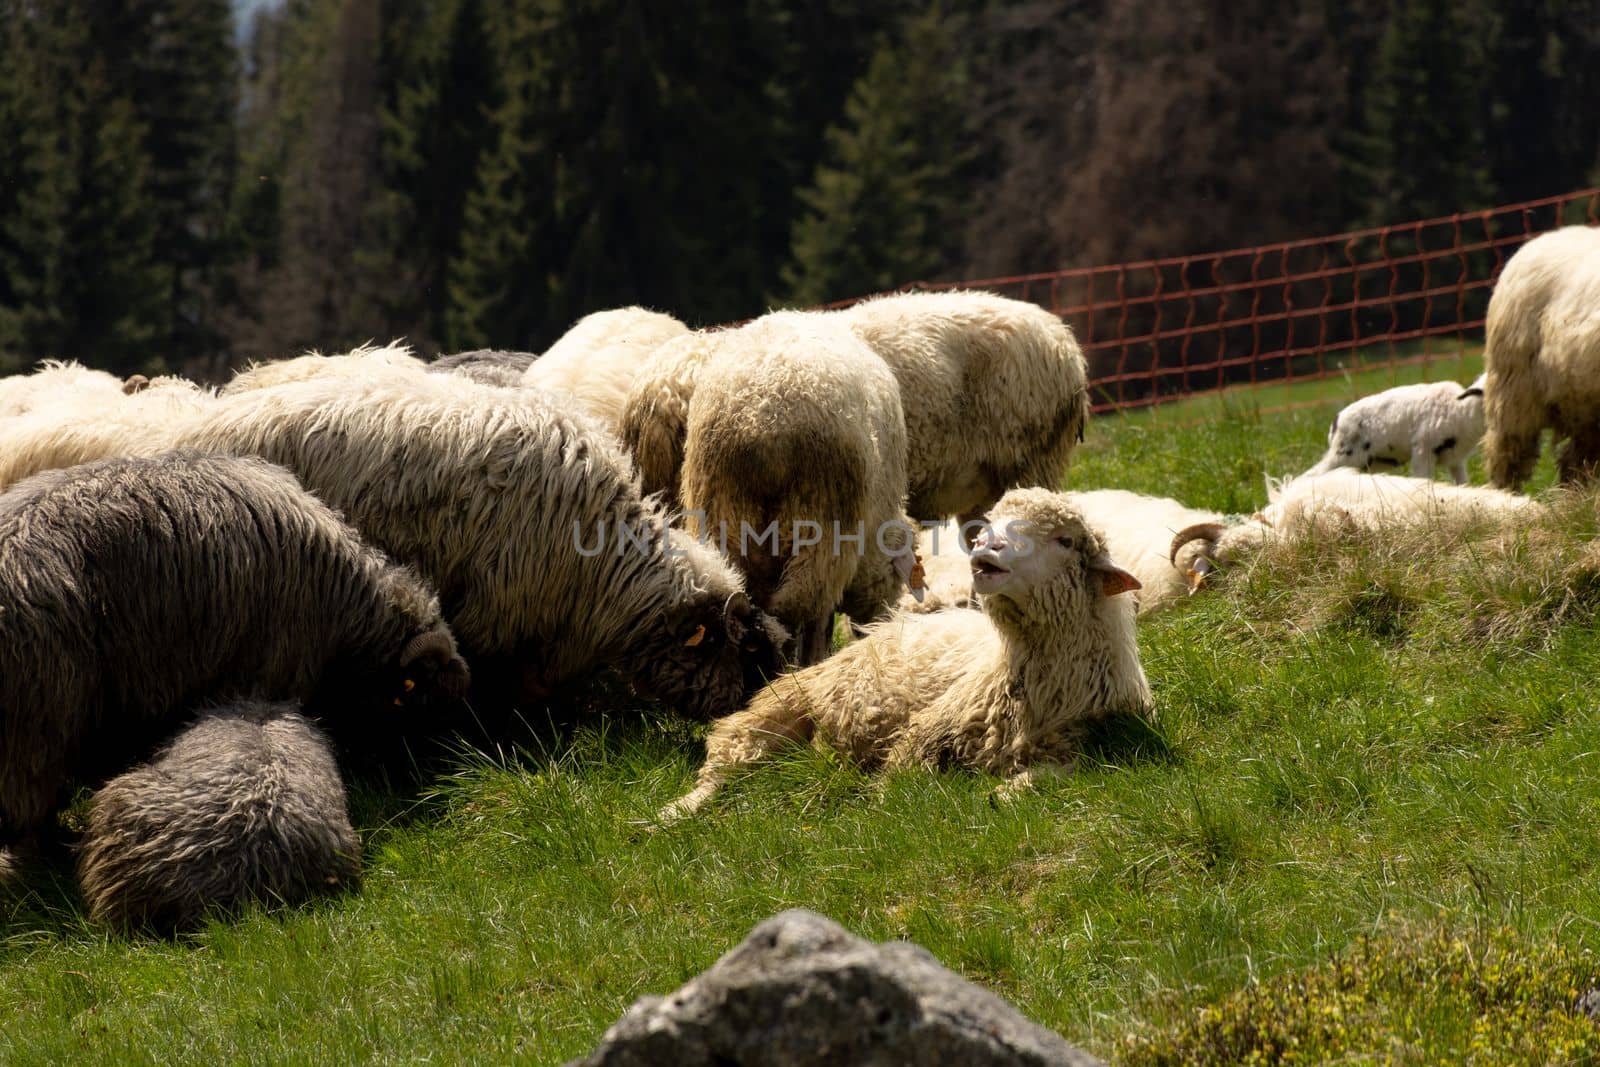 Flock of sheep grazing in meadow in with the Tatra Mountains behind, in Poland by scasal15